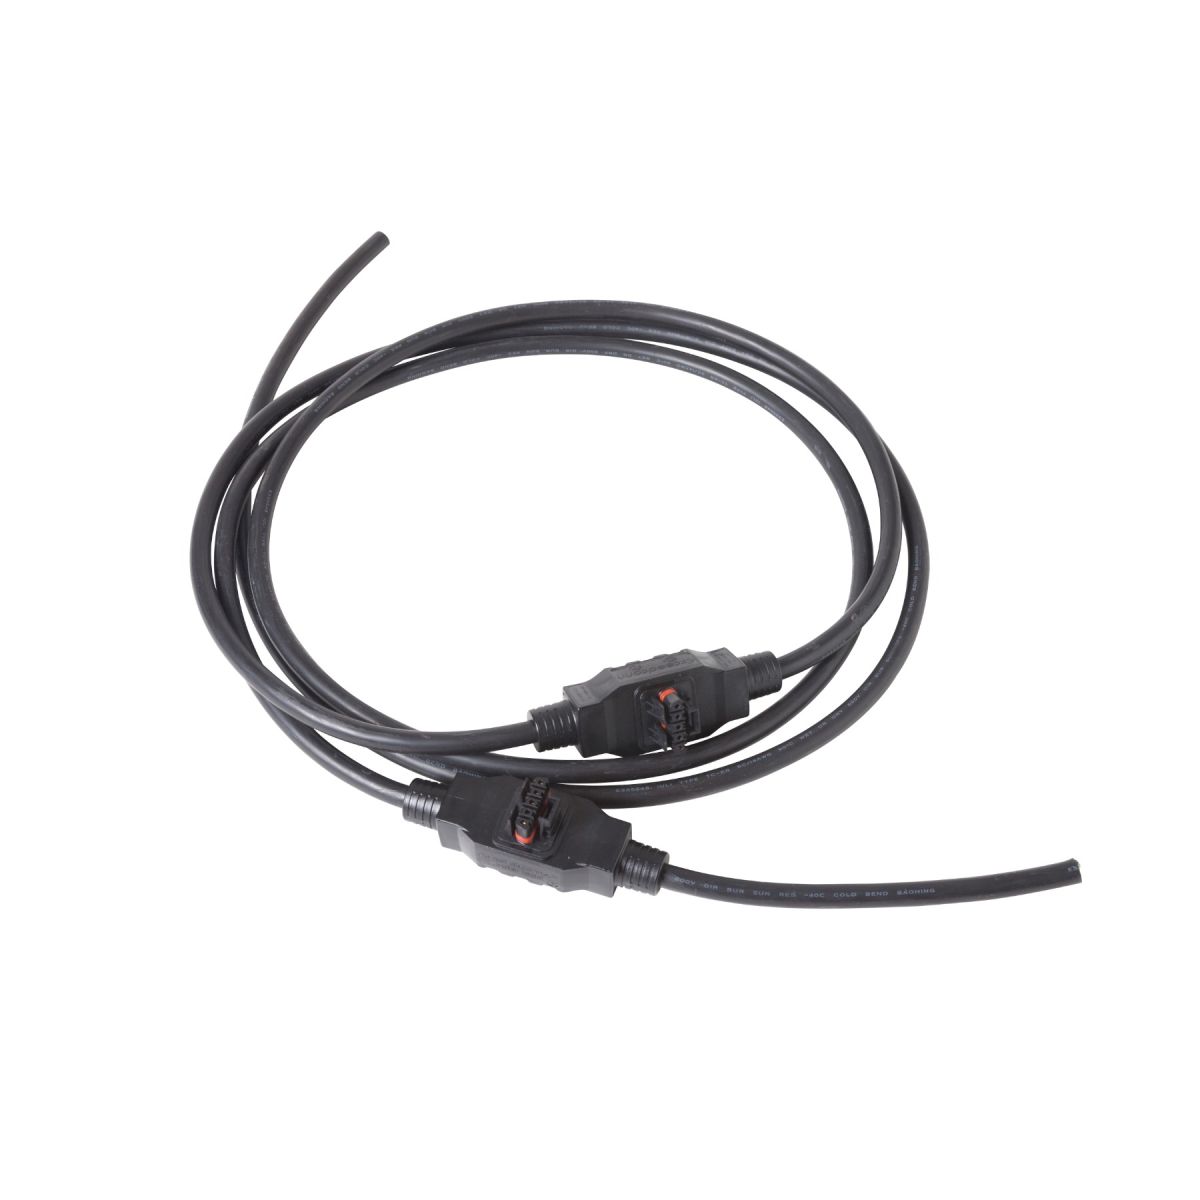 APSystems 2m 3PH Bus cable for YC1000 2322304852 - 1